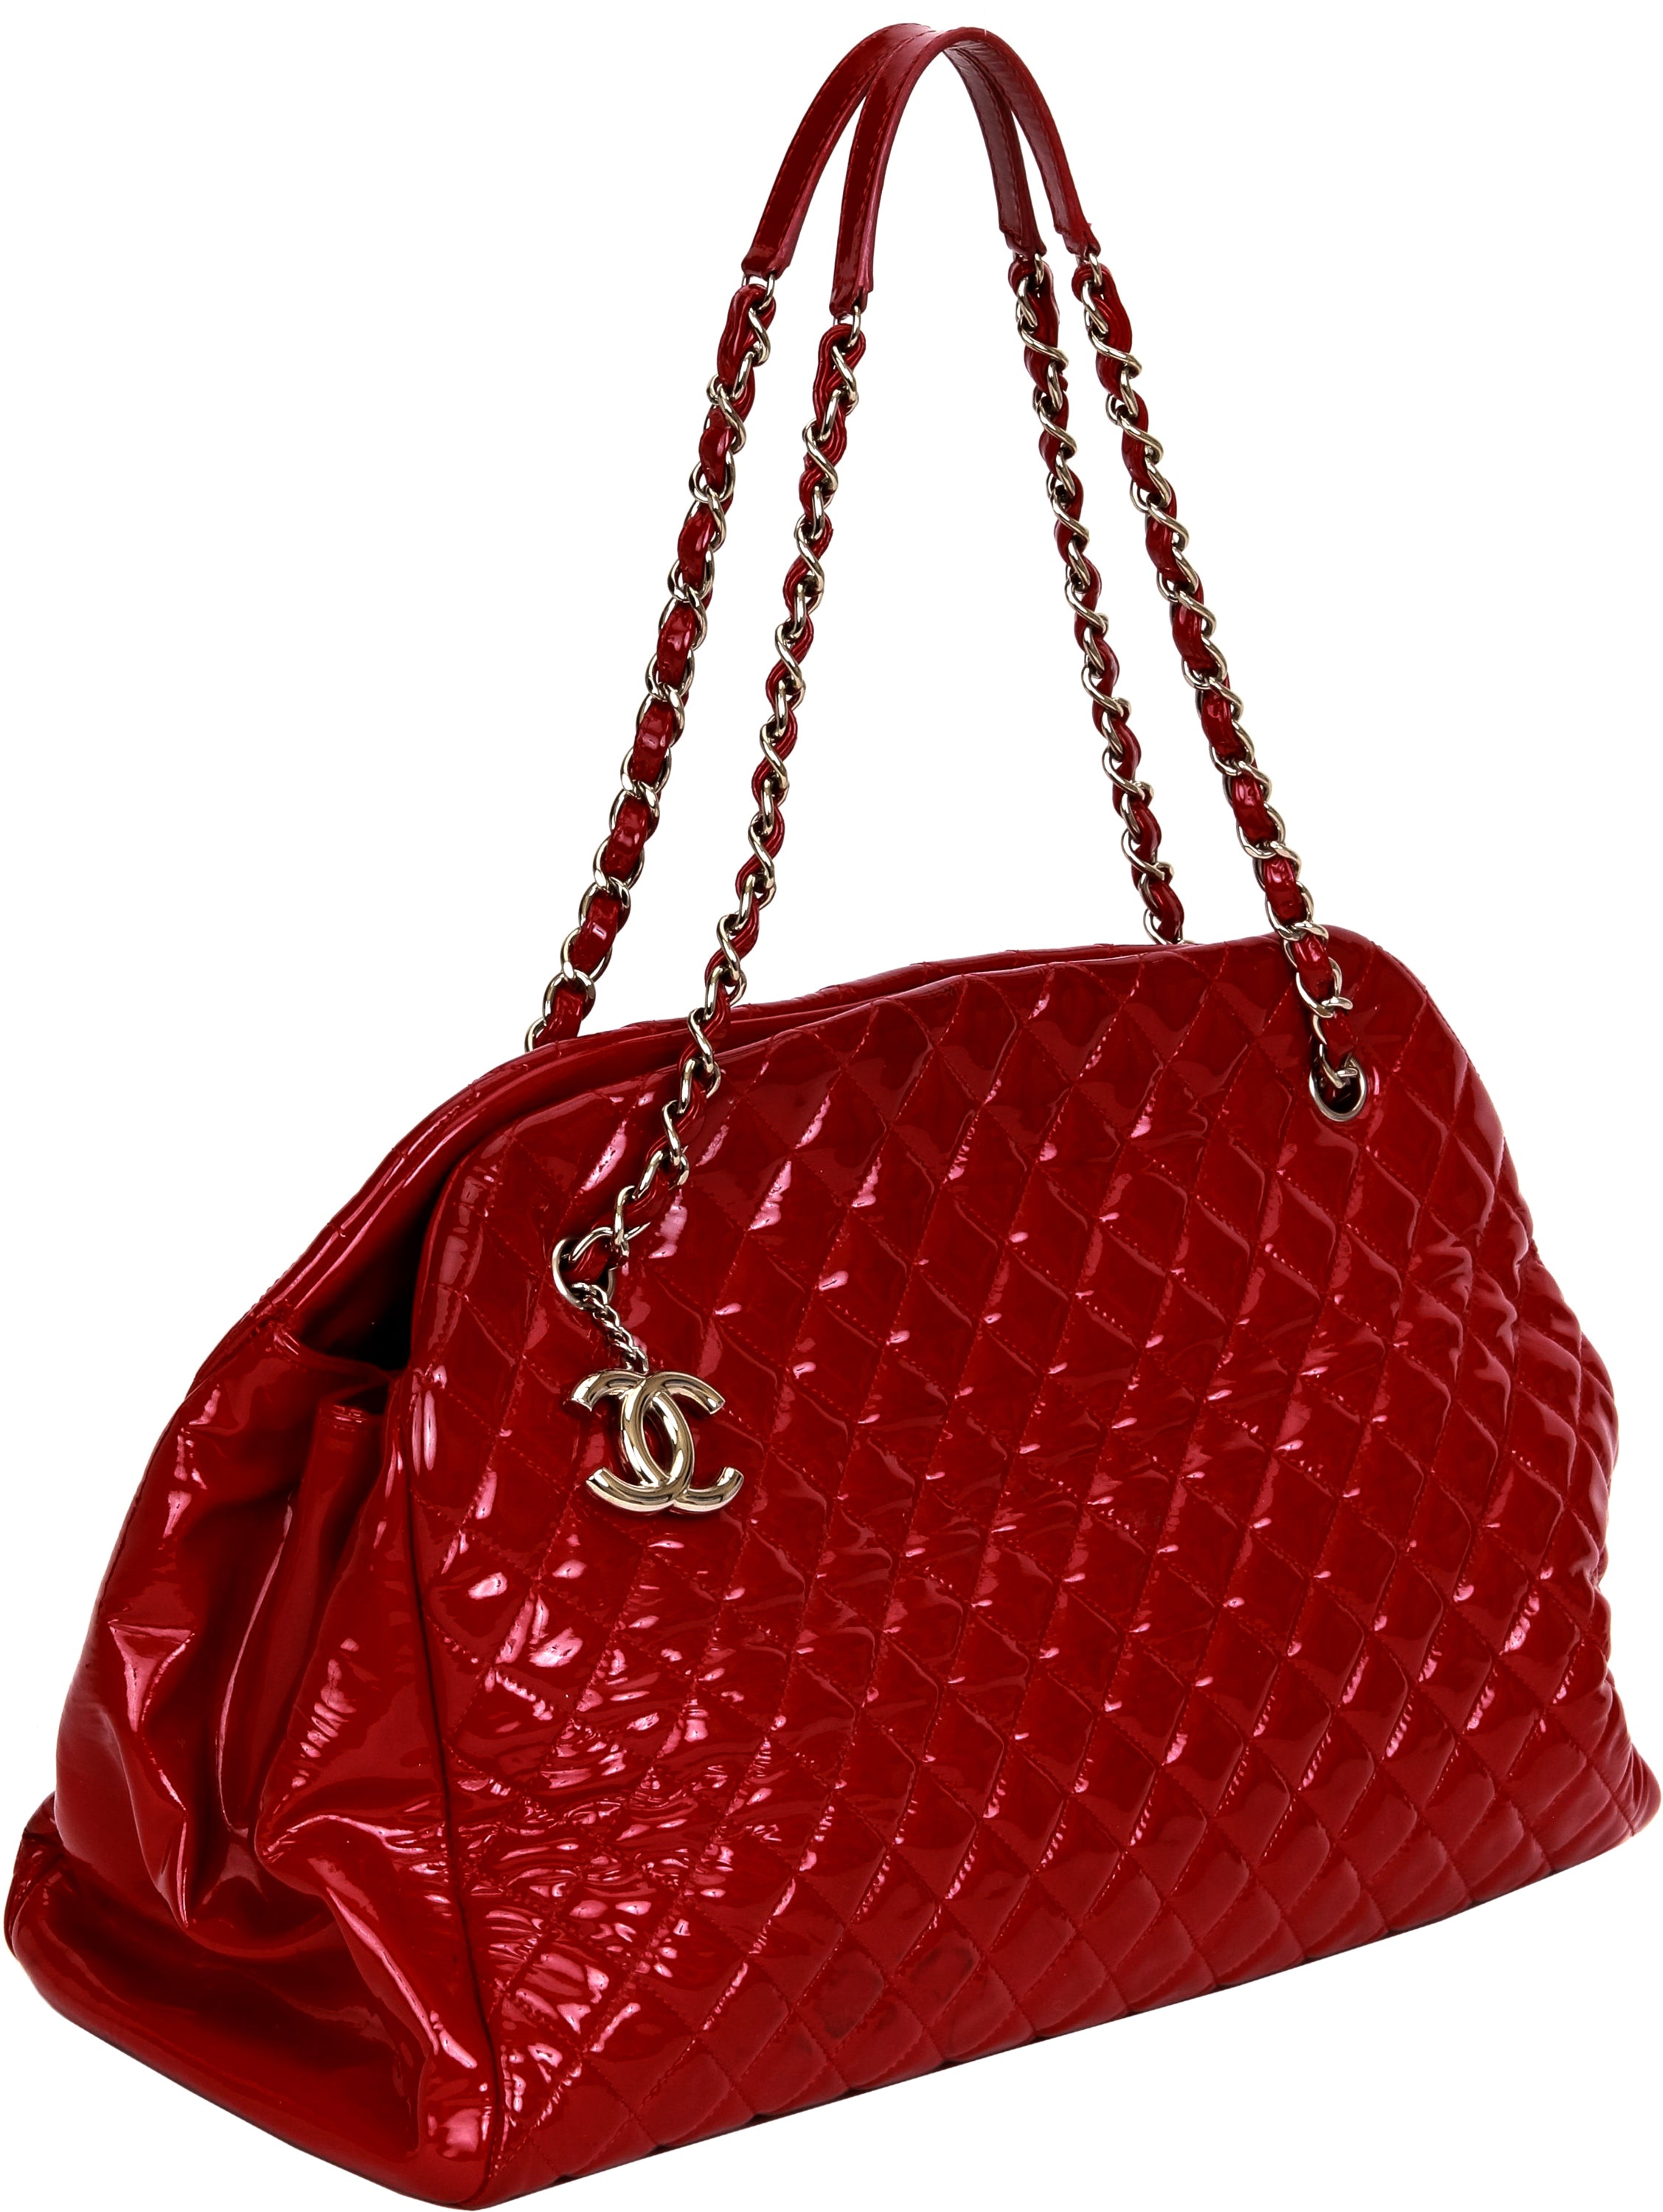 red patent chanel bag